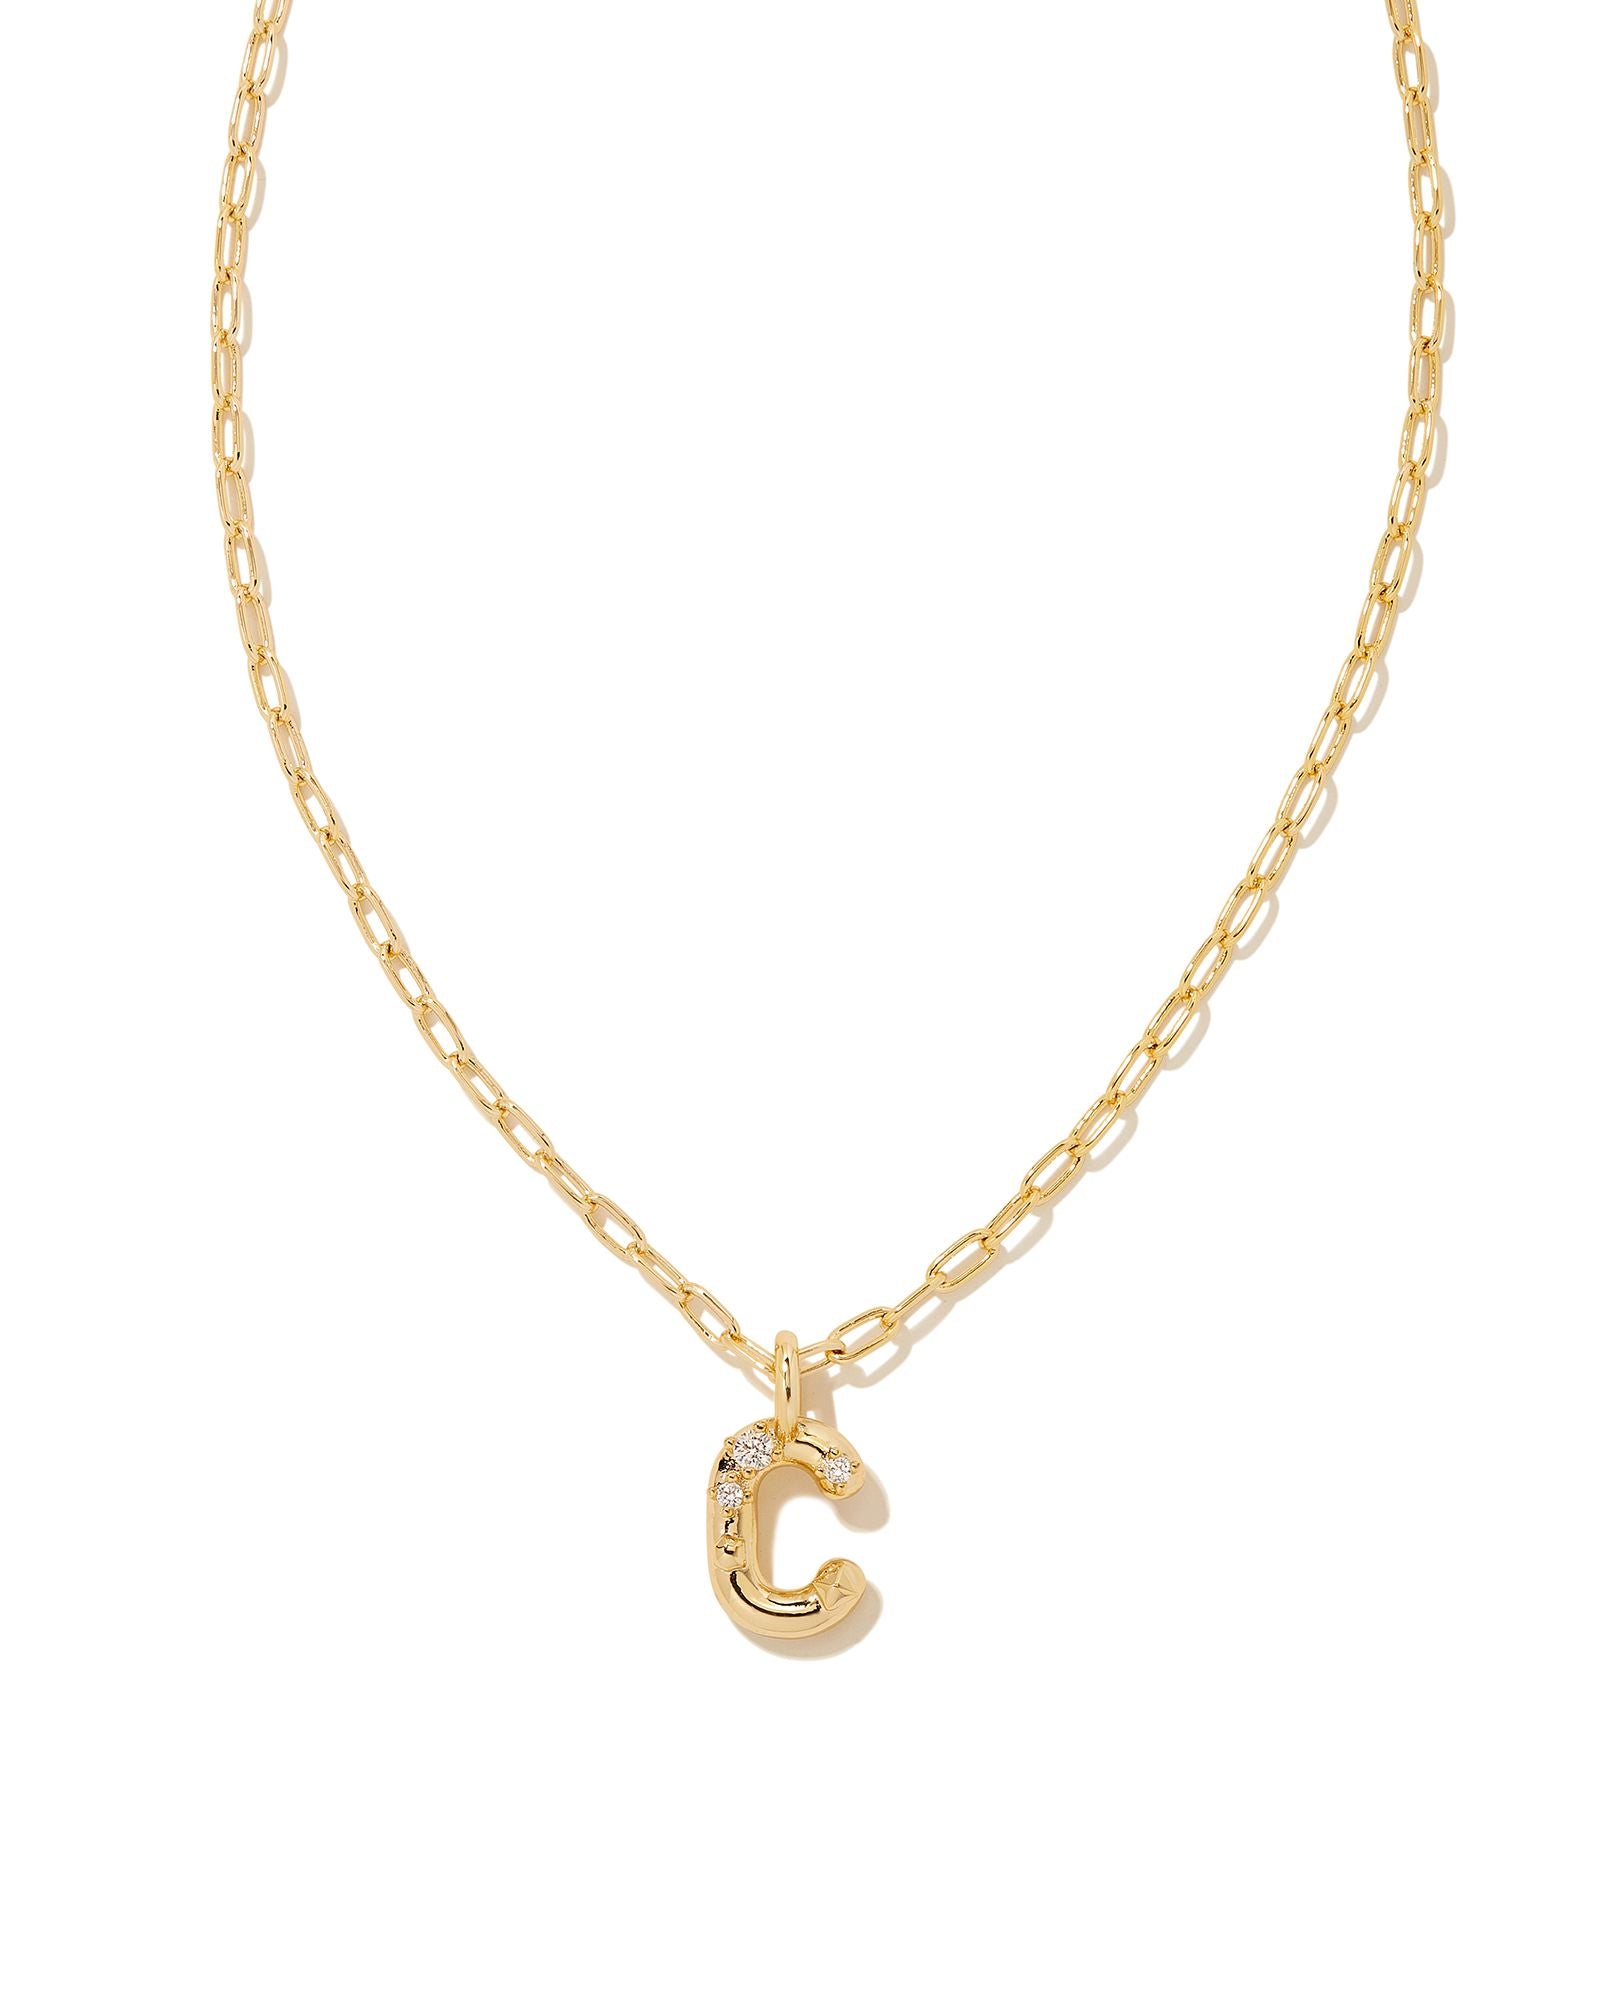 Crystal Letter C Pendant Necklace in Gold Metal